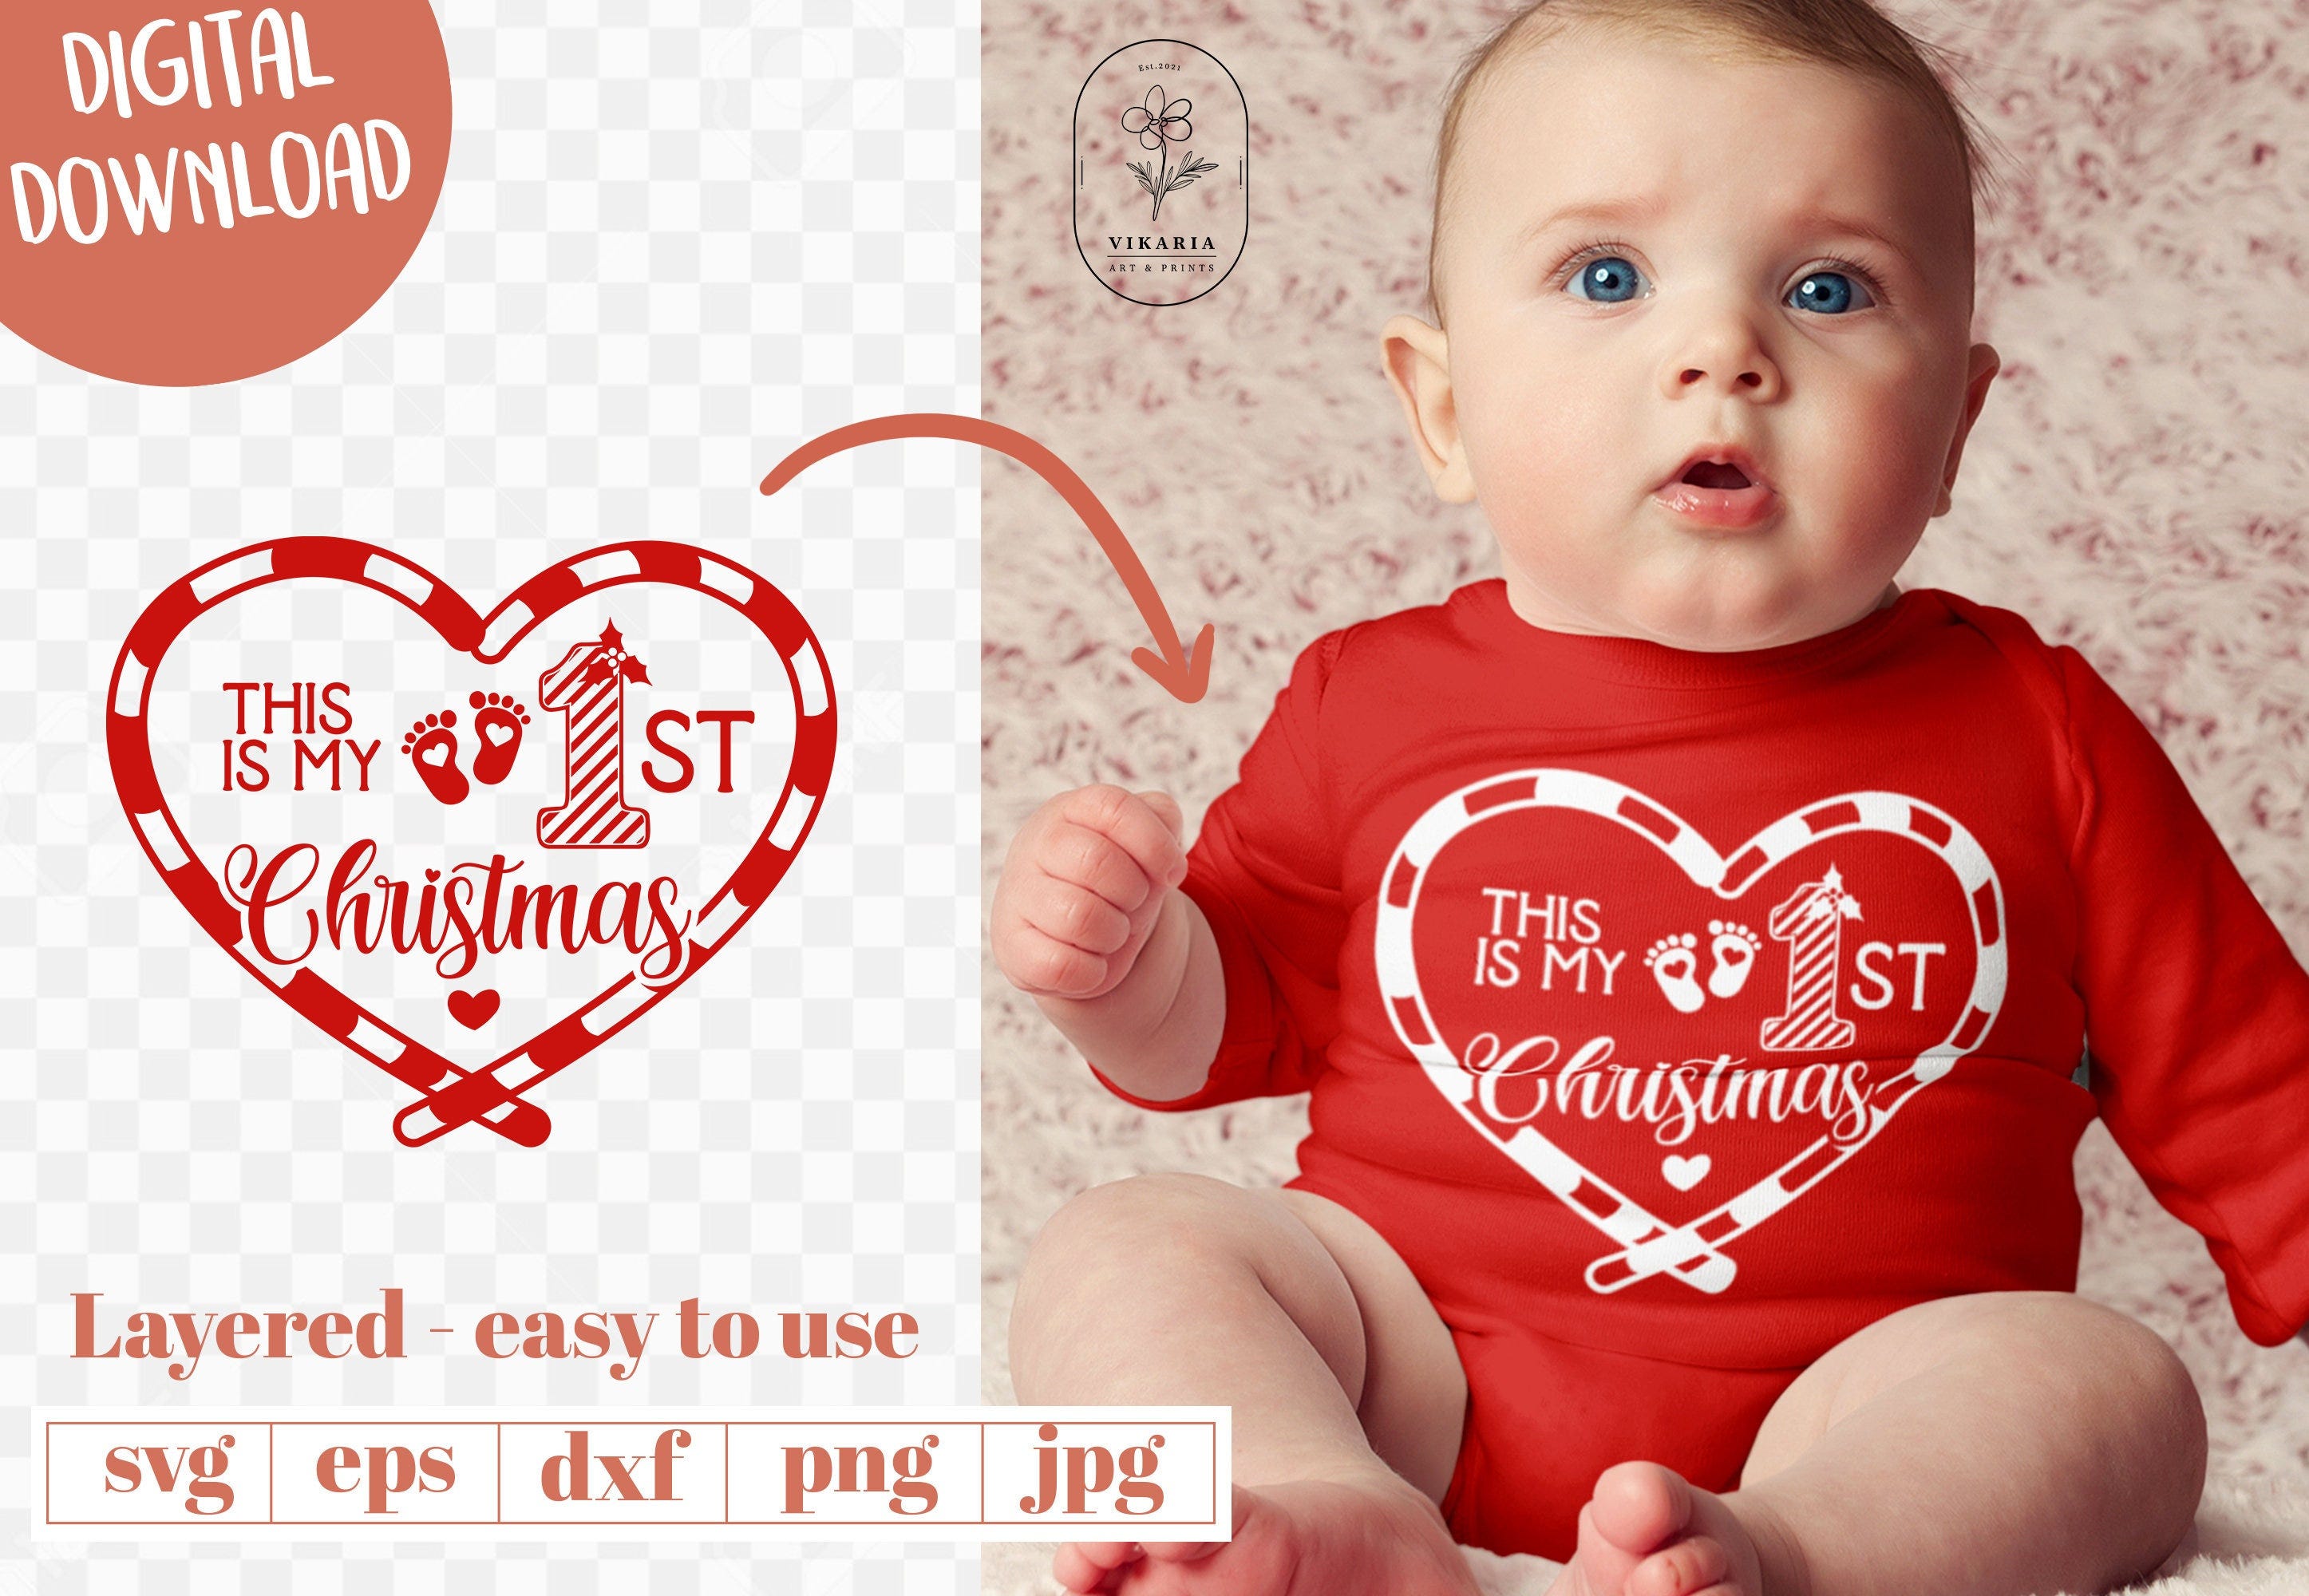 This is my first christmas, Baby First Xmas SVG, Newborn 1st Christmas, Baby Shower Gift, Baby